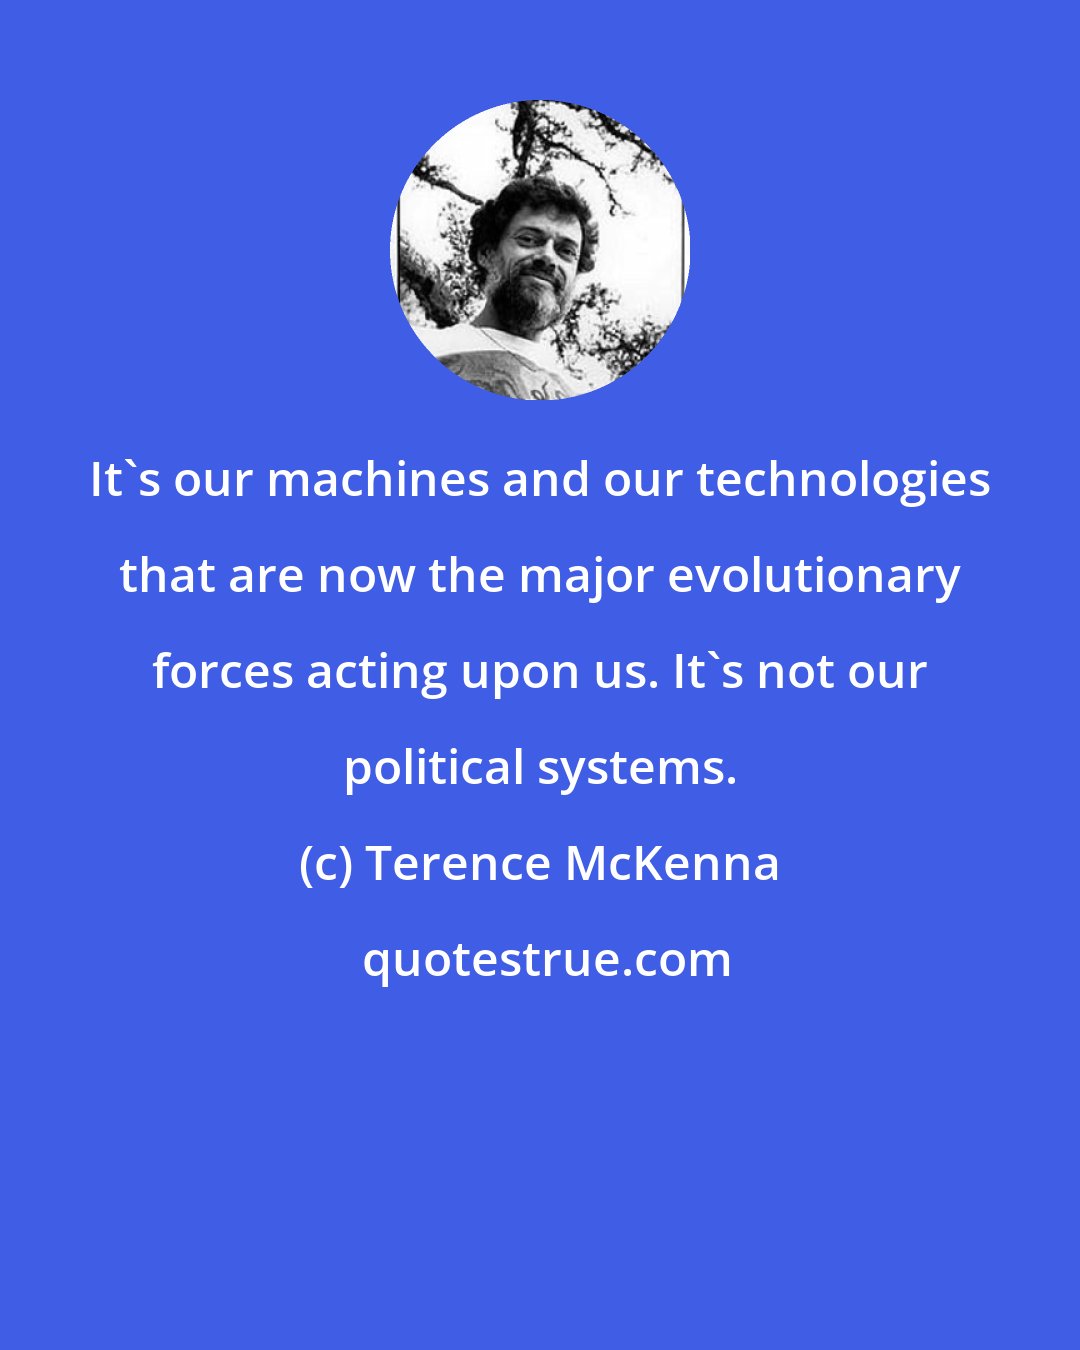 Terence McKenna: It's our machines and our technologies that are now the major evolutionary forces acting upon us. It's not our political systems.